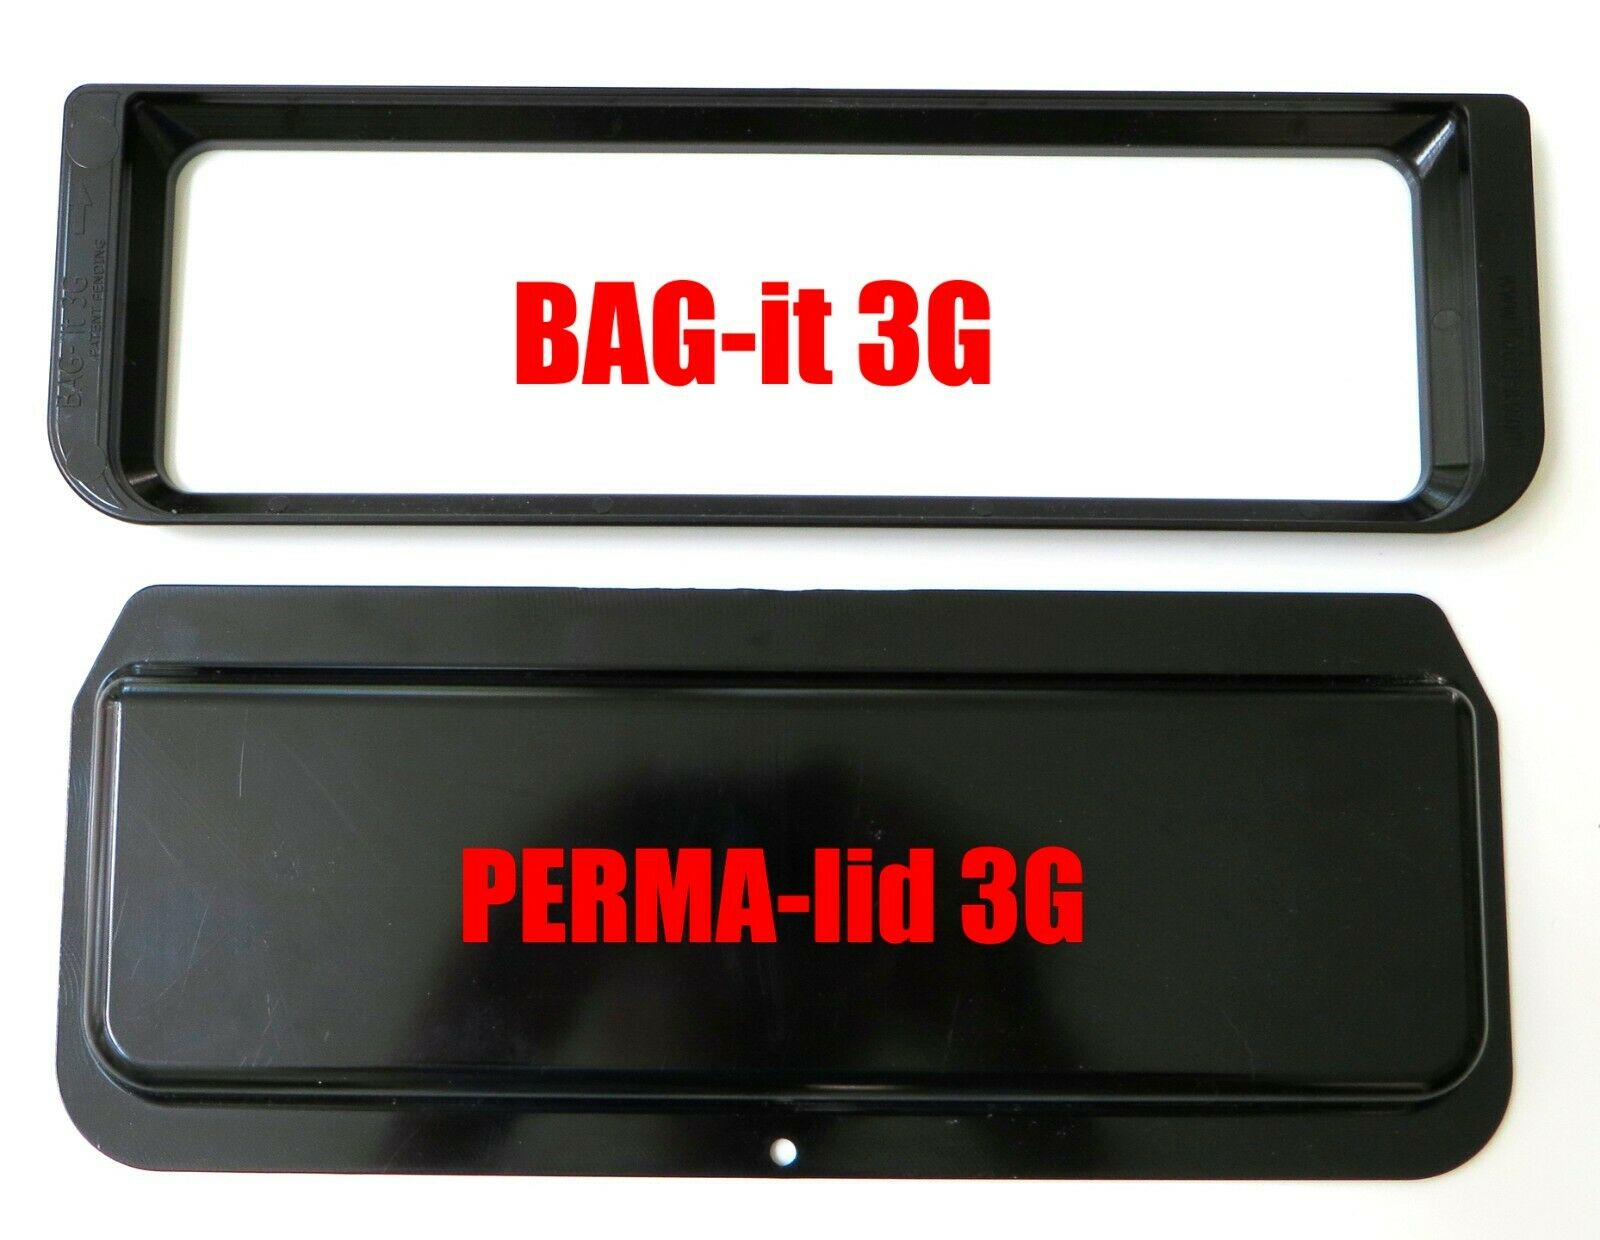 Bag-it 3g & Perma-lid For Littermaid 3rd Edition Receptacles - An End To Buying!